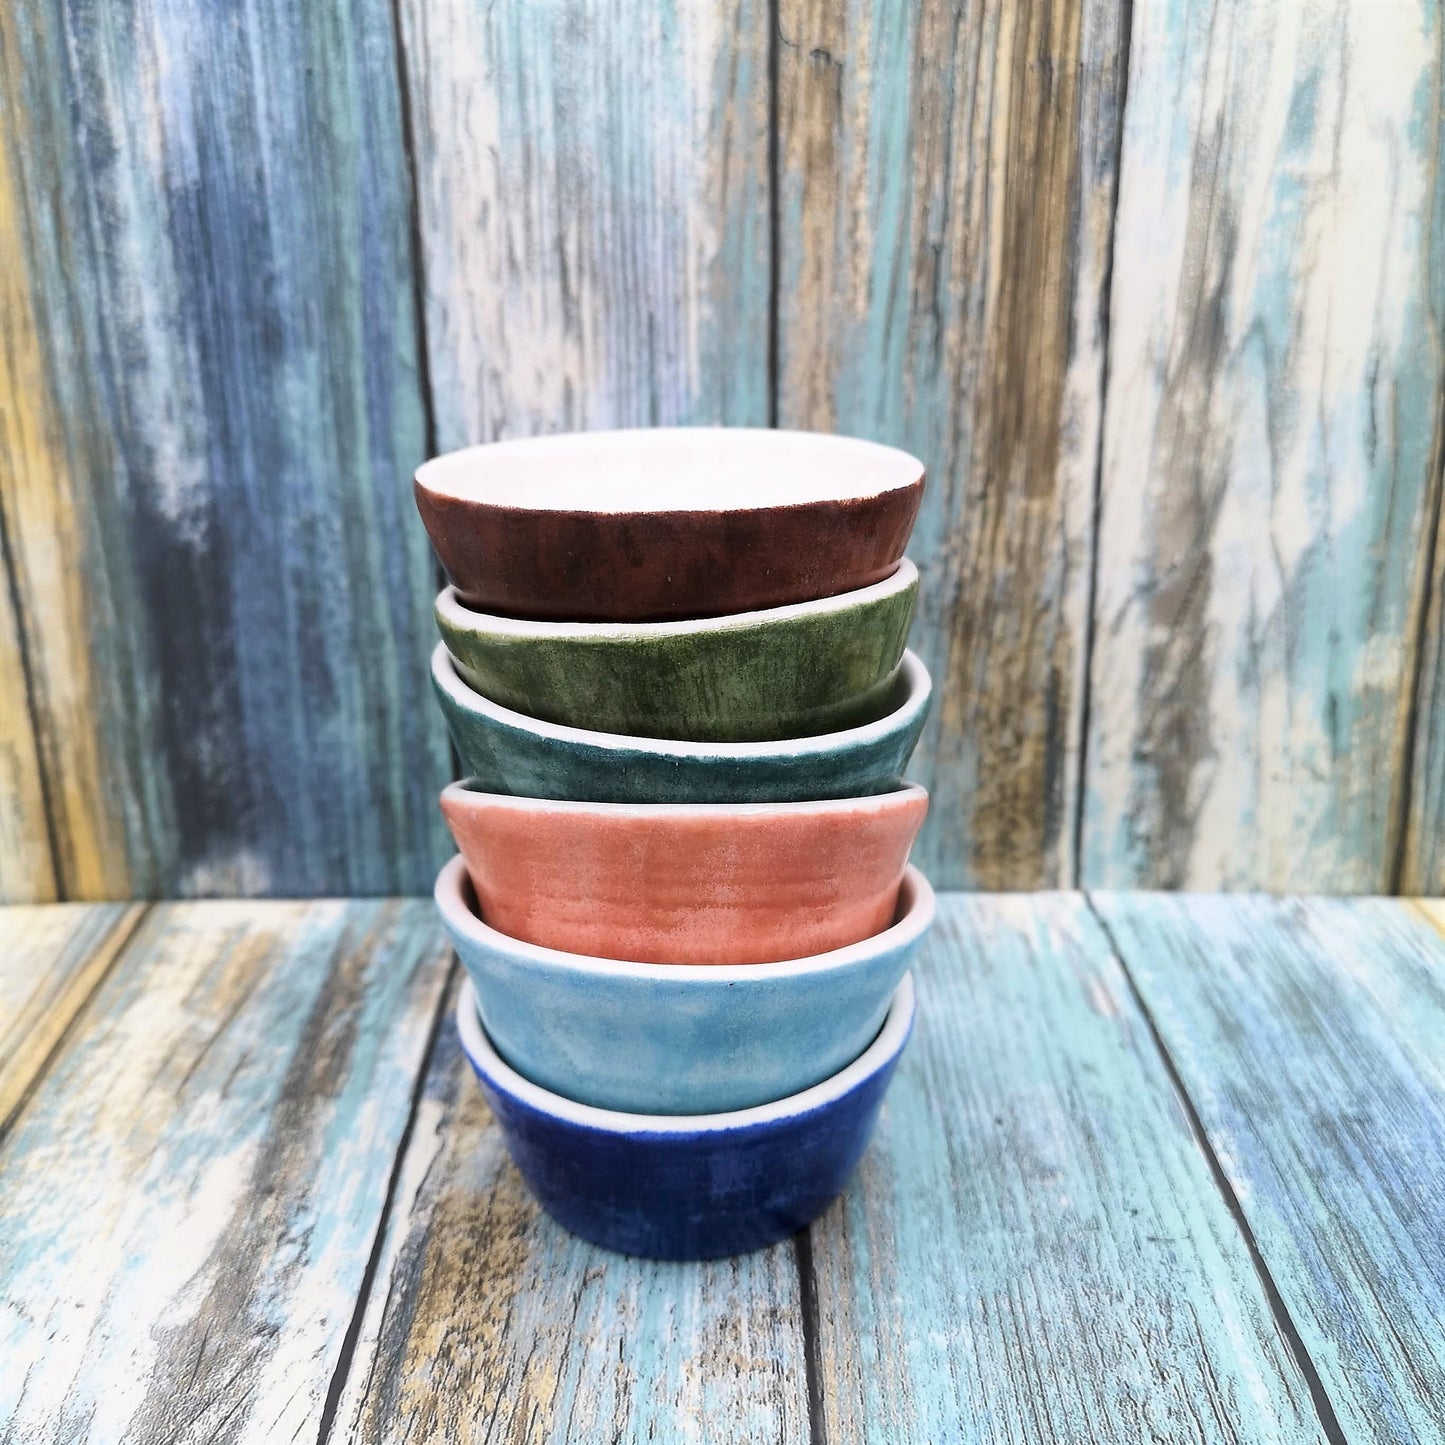 Small Ceramic Bowl Set Of 6, Serving Bowl, Unique Small Sauces Bowls To Serve Small Things, Decorative Bowl Housewarming Gift For New Home - Ceramica Ana Rafael